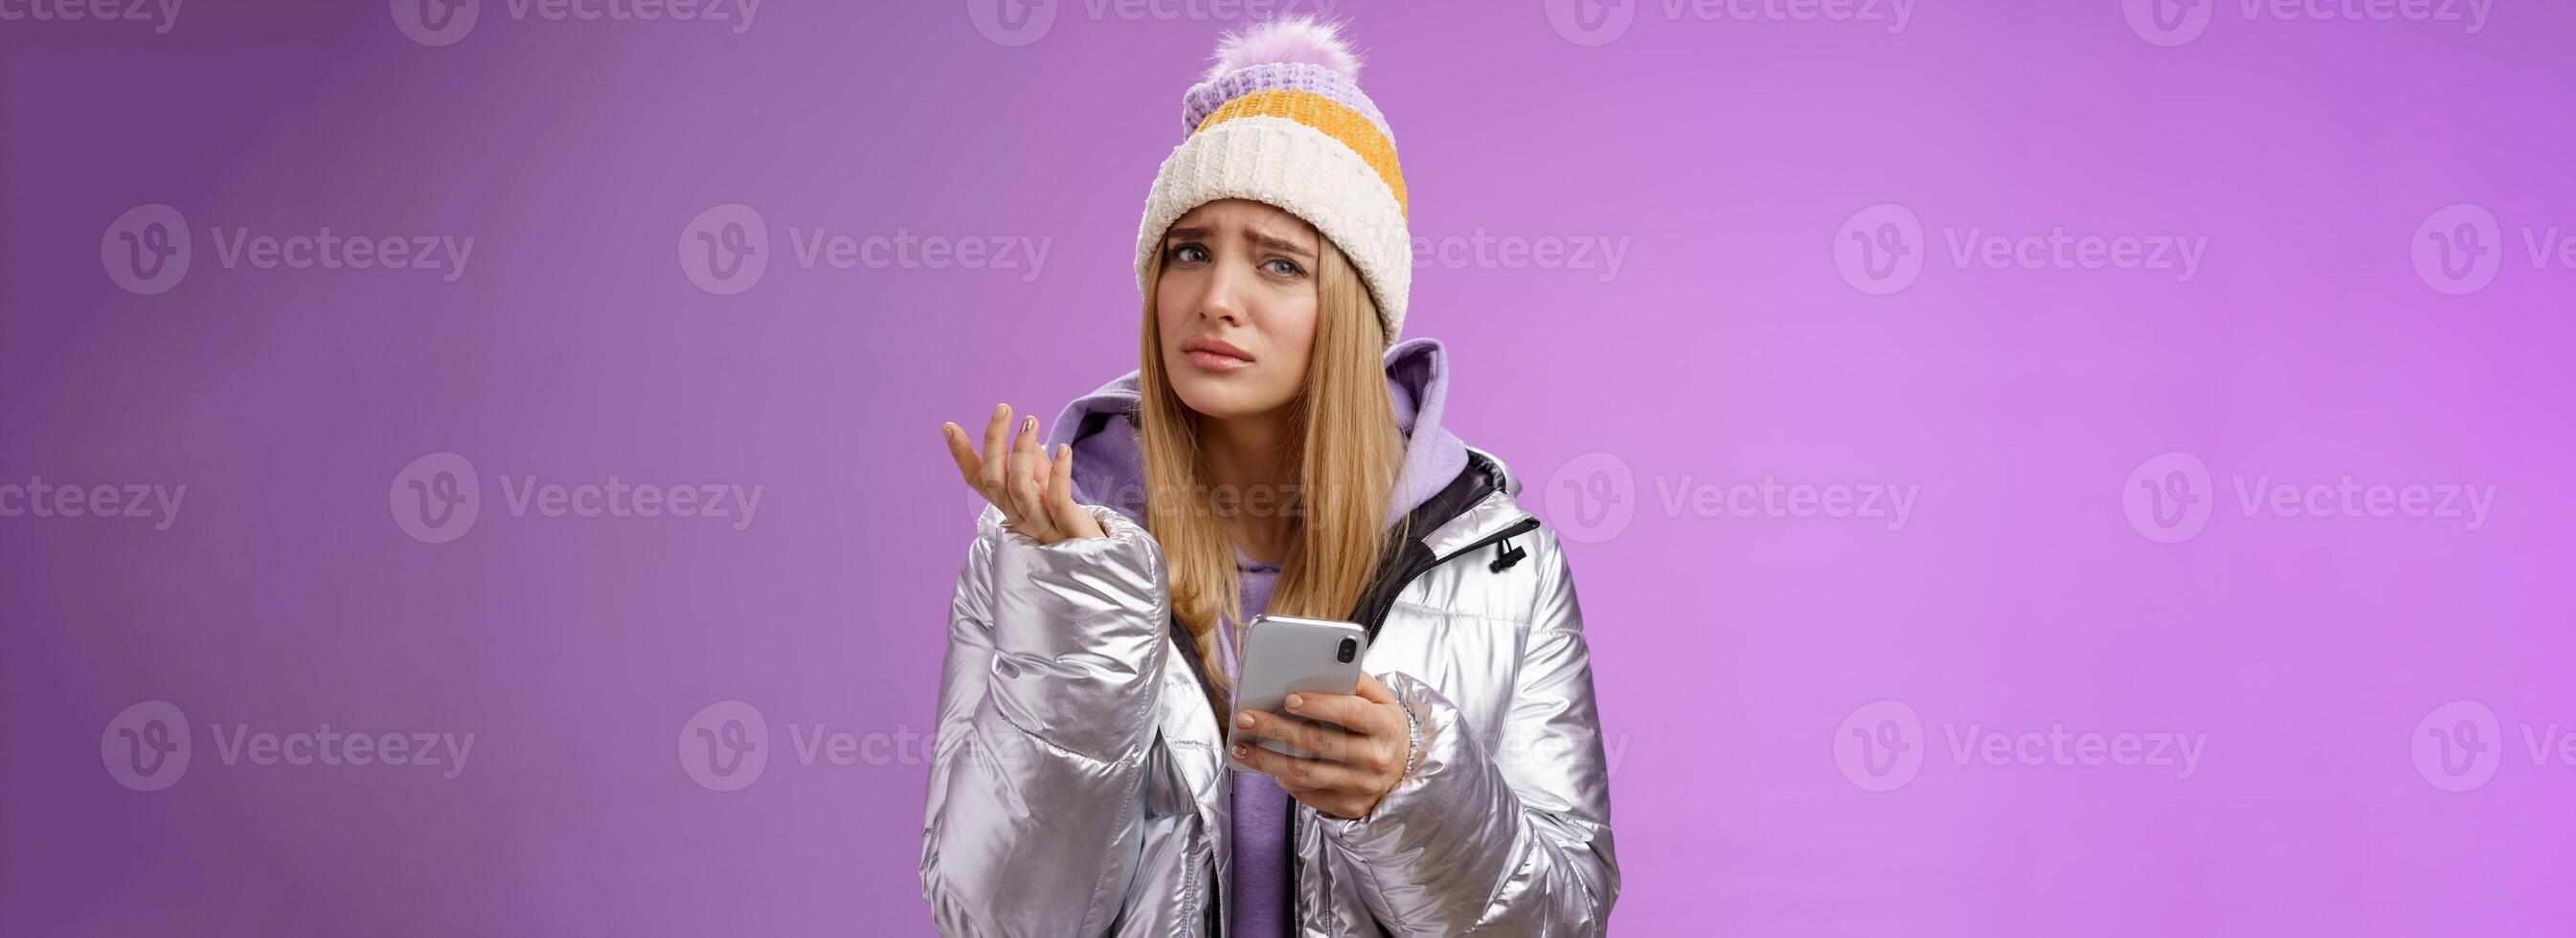 Questioned complicated cute blond girlfriend receive strange message look perplexed confused raising hand shrugging lift eyebrow cannot understand meaning holding smartphone, purple background photo